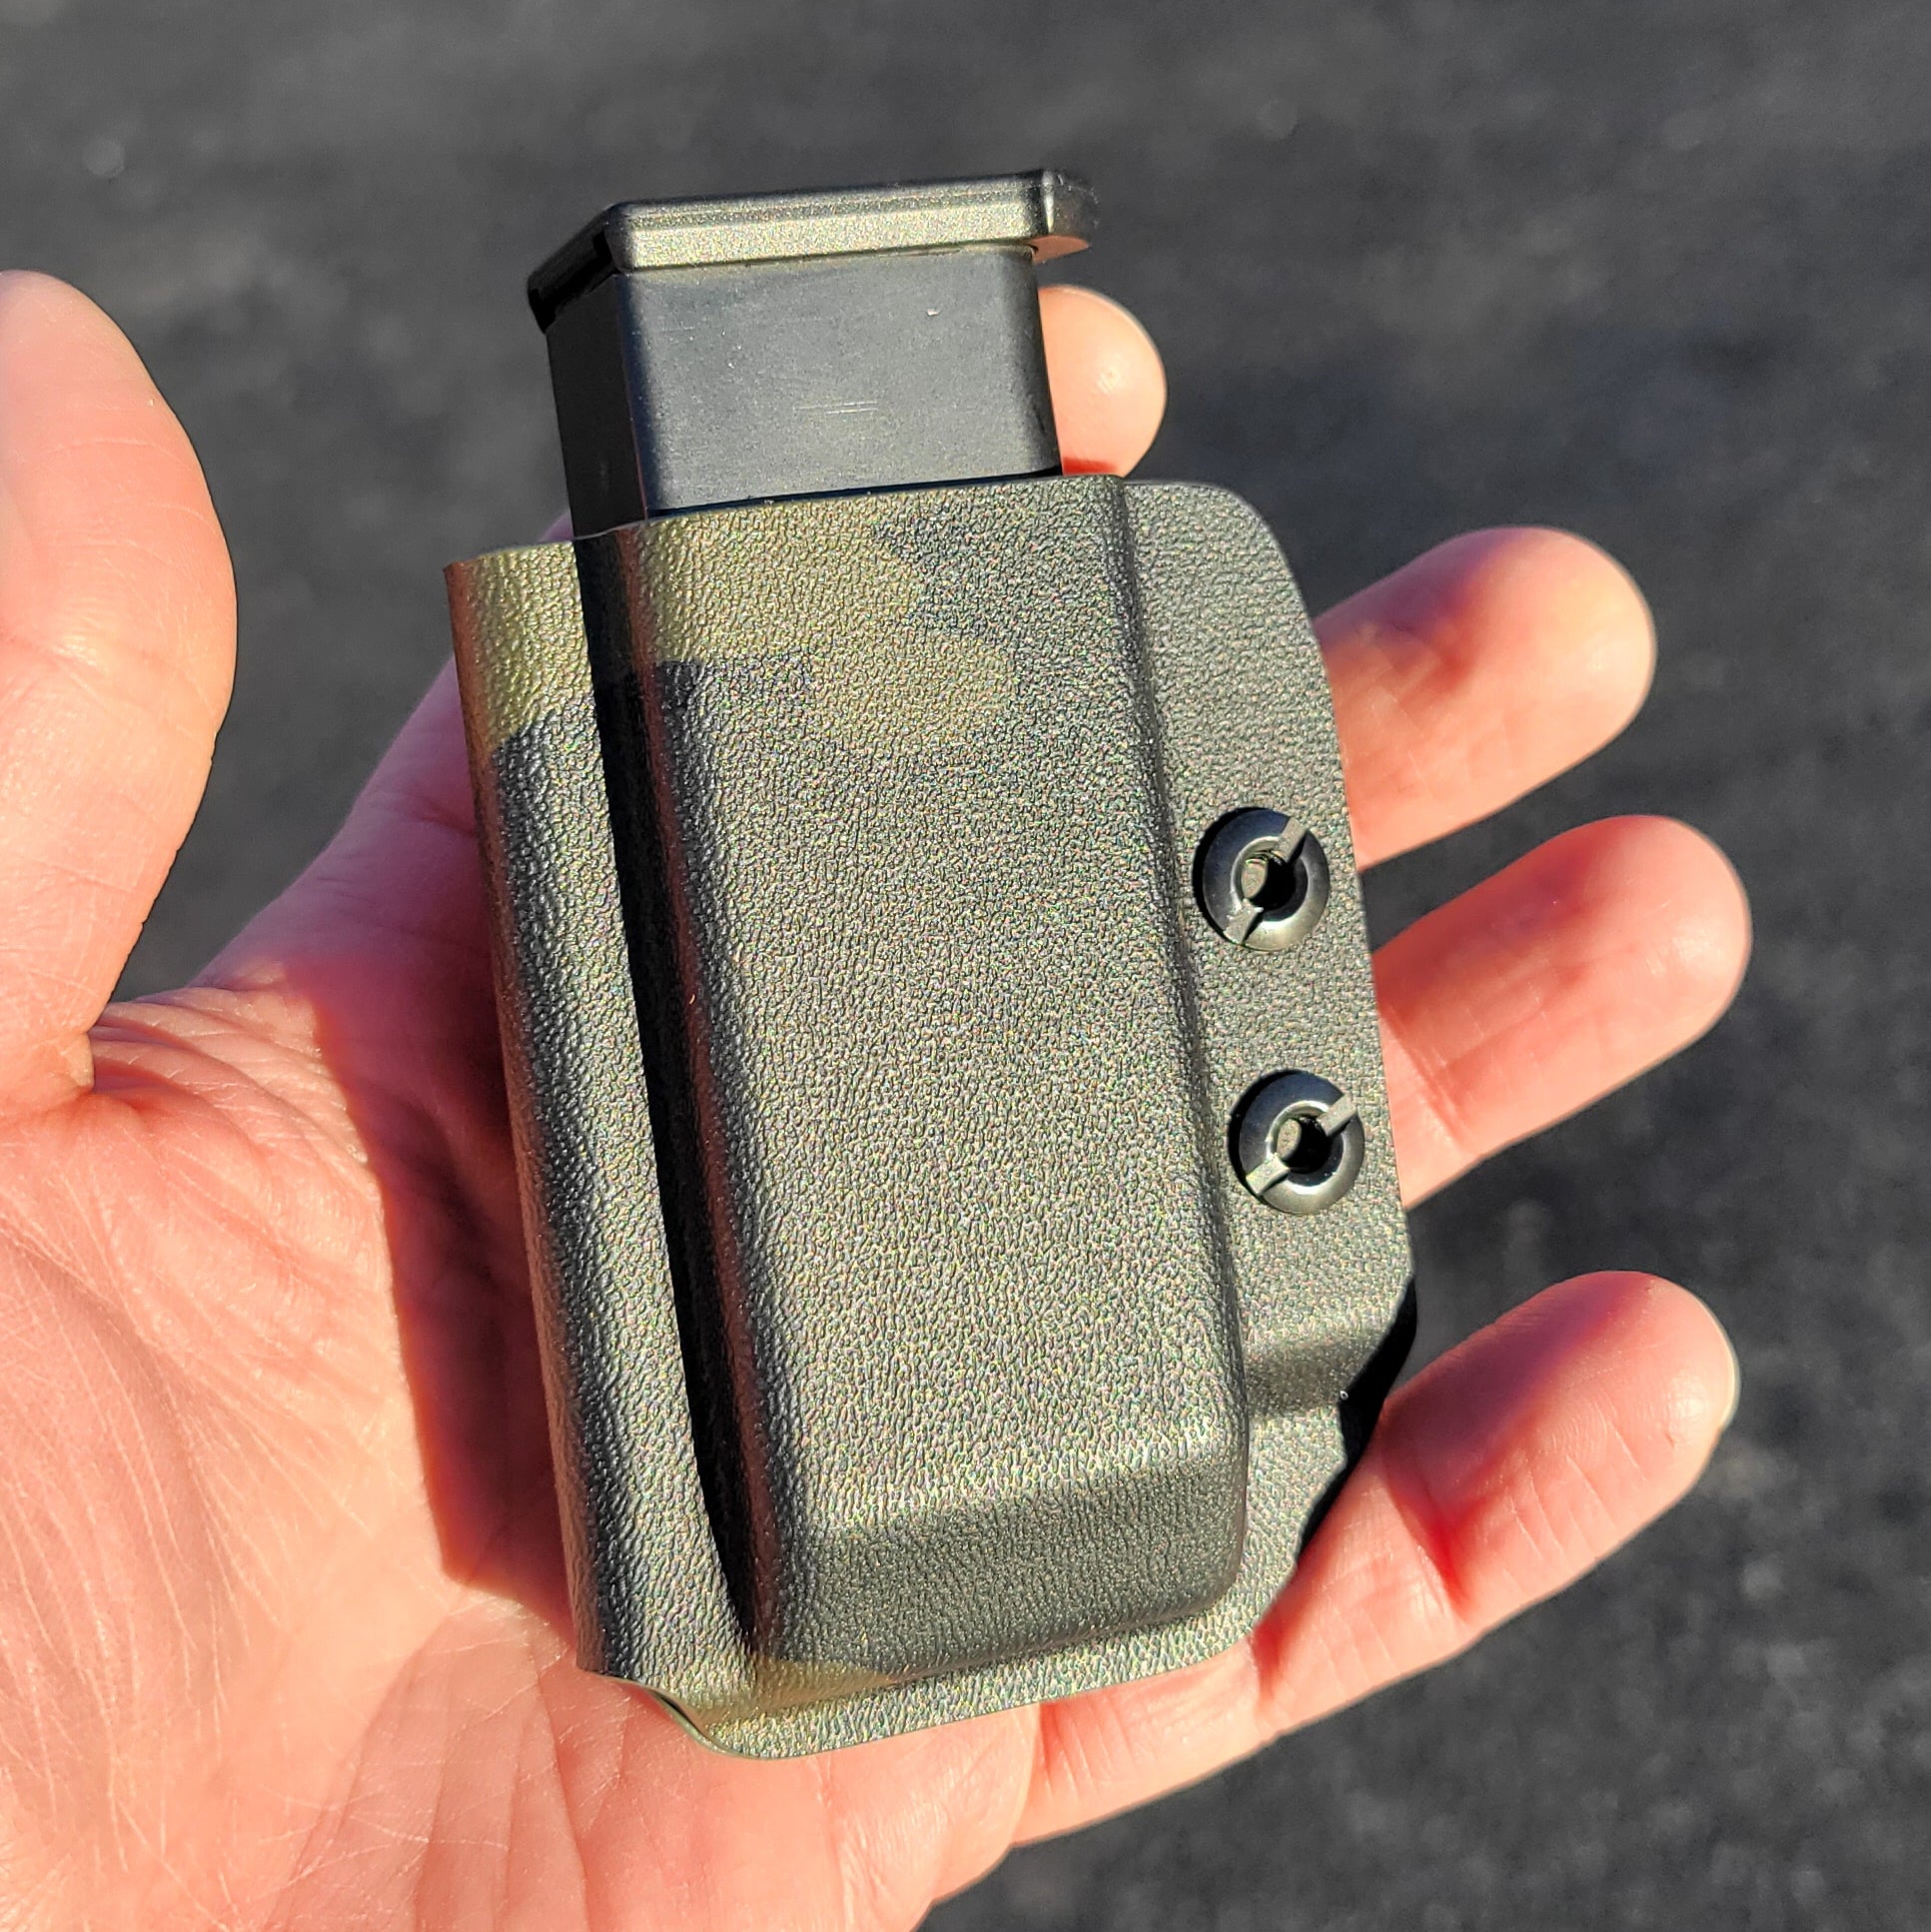 For the Best Kydex IWB AIWB appendix inside waistband magazine pouch carrier holster for Sig Sauer P365XL, shop Four Brothers Holsters.  Suitable for belt widths of 1 1/2" & 1 3/4". Adjustable retention. Appendix Carry IWB Carrier Holster Hellcat Pro, Glock 43X & 48, Smith and Wesson Equalizer, and Shield Plus 